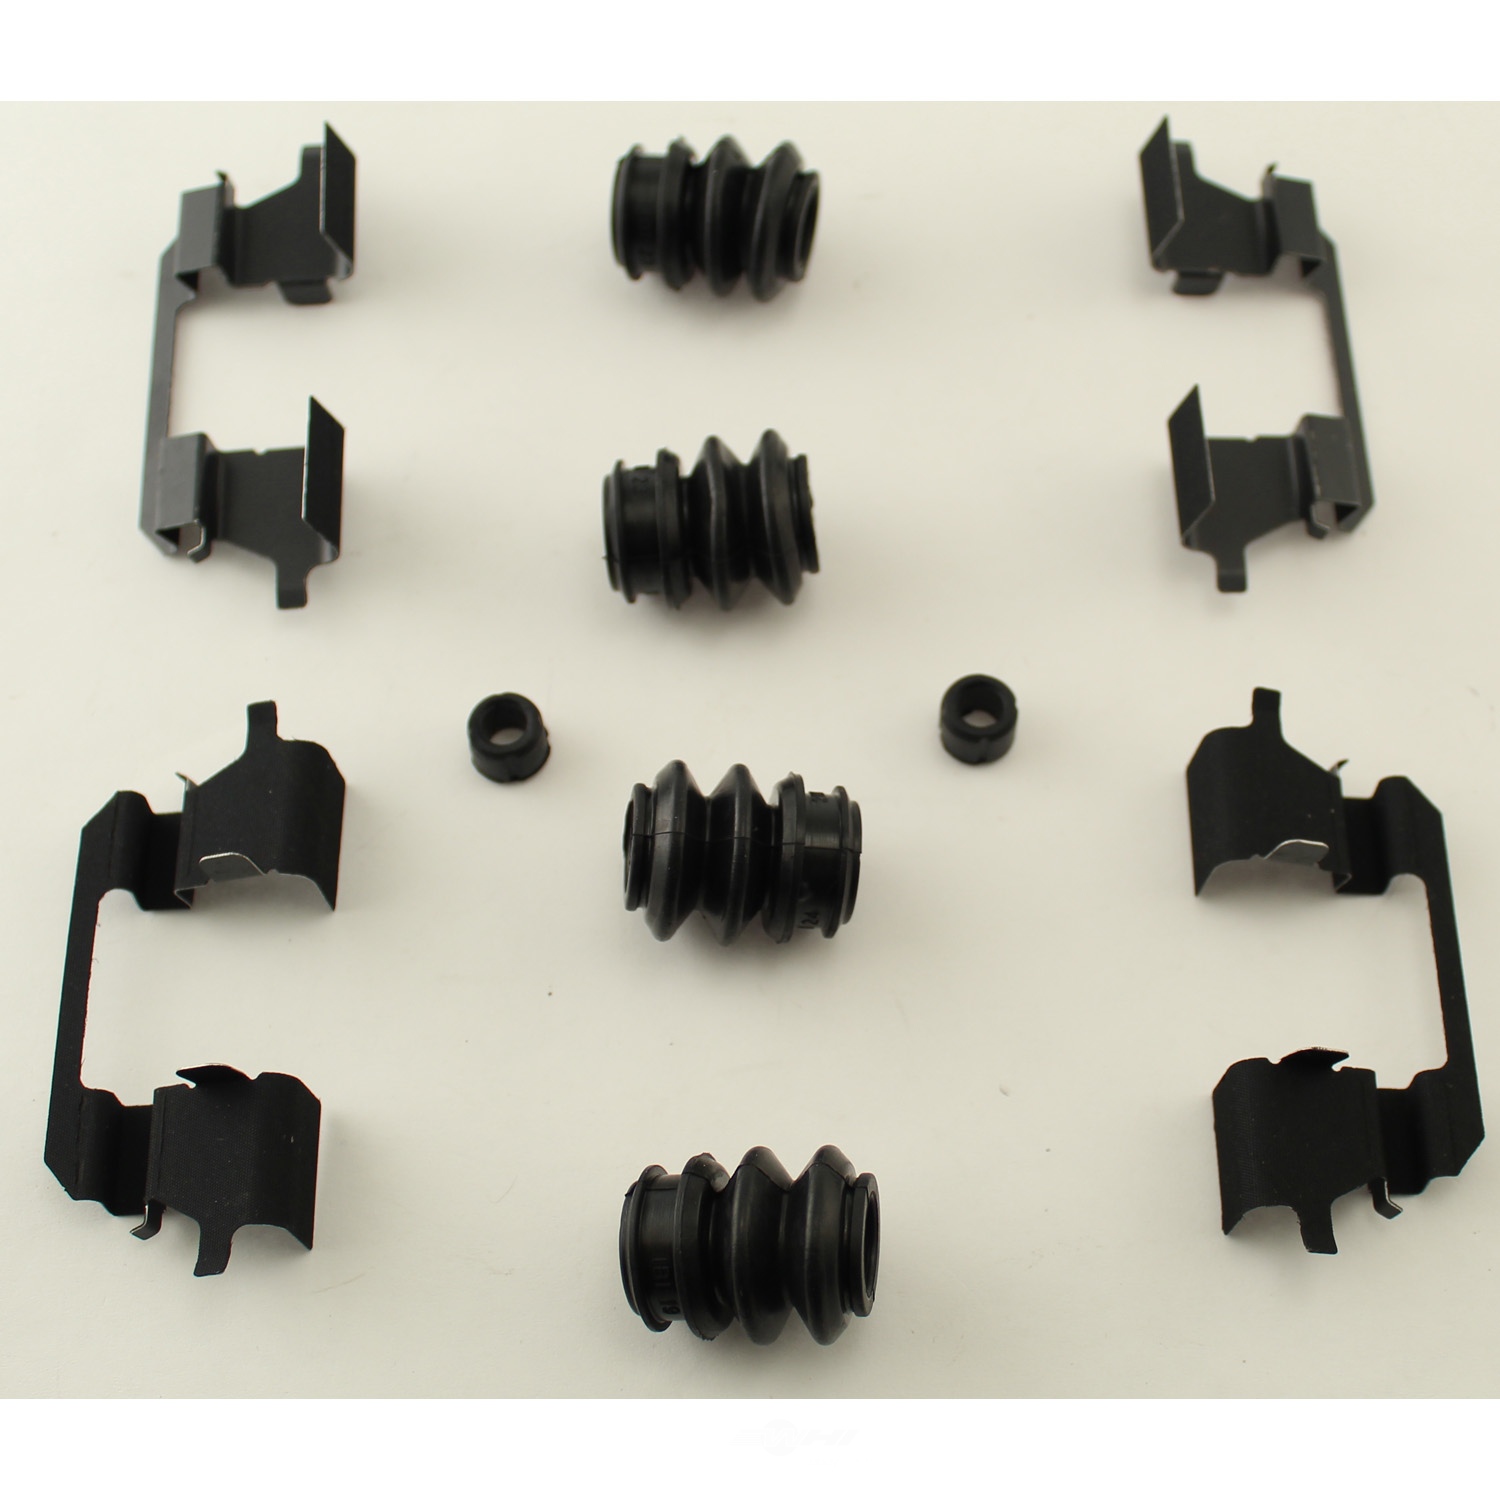 CARLSON QUALITY BRAKE PARTS - Quiet Glide Premium Kit-Includes Coated Clips and Bushings - CRL 13307Q